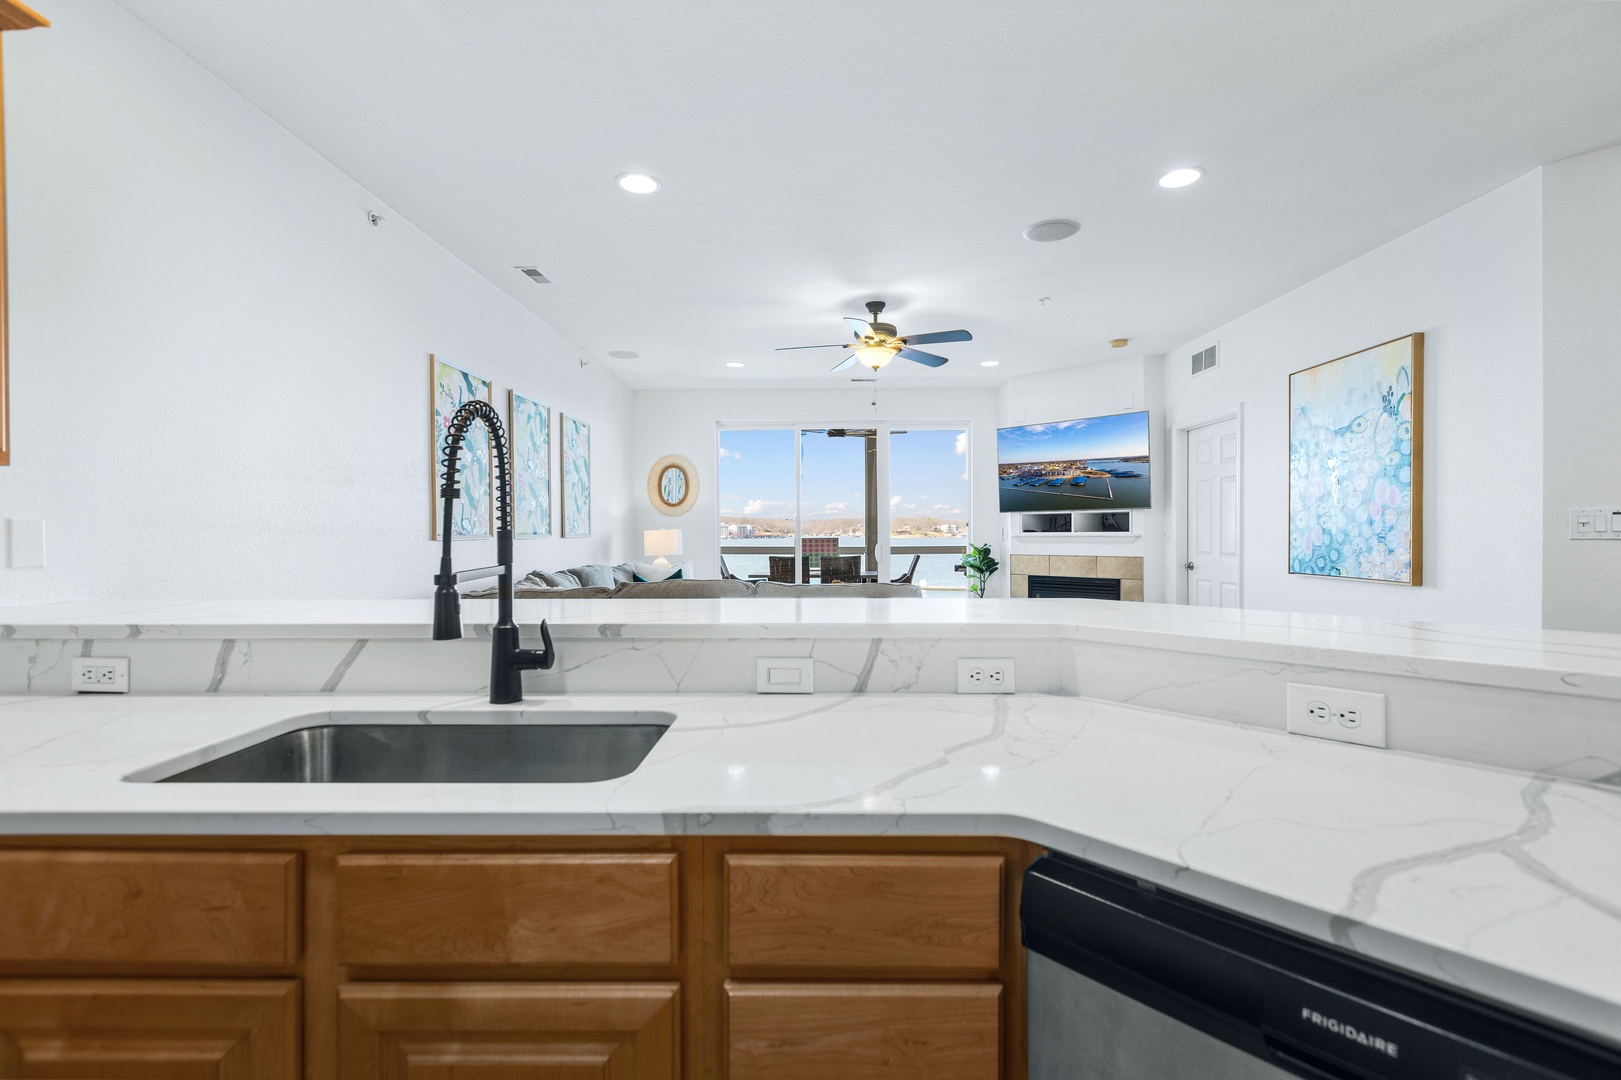 This kitchen offers ample space and all the comforts of home